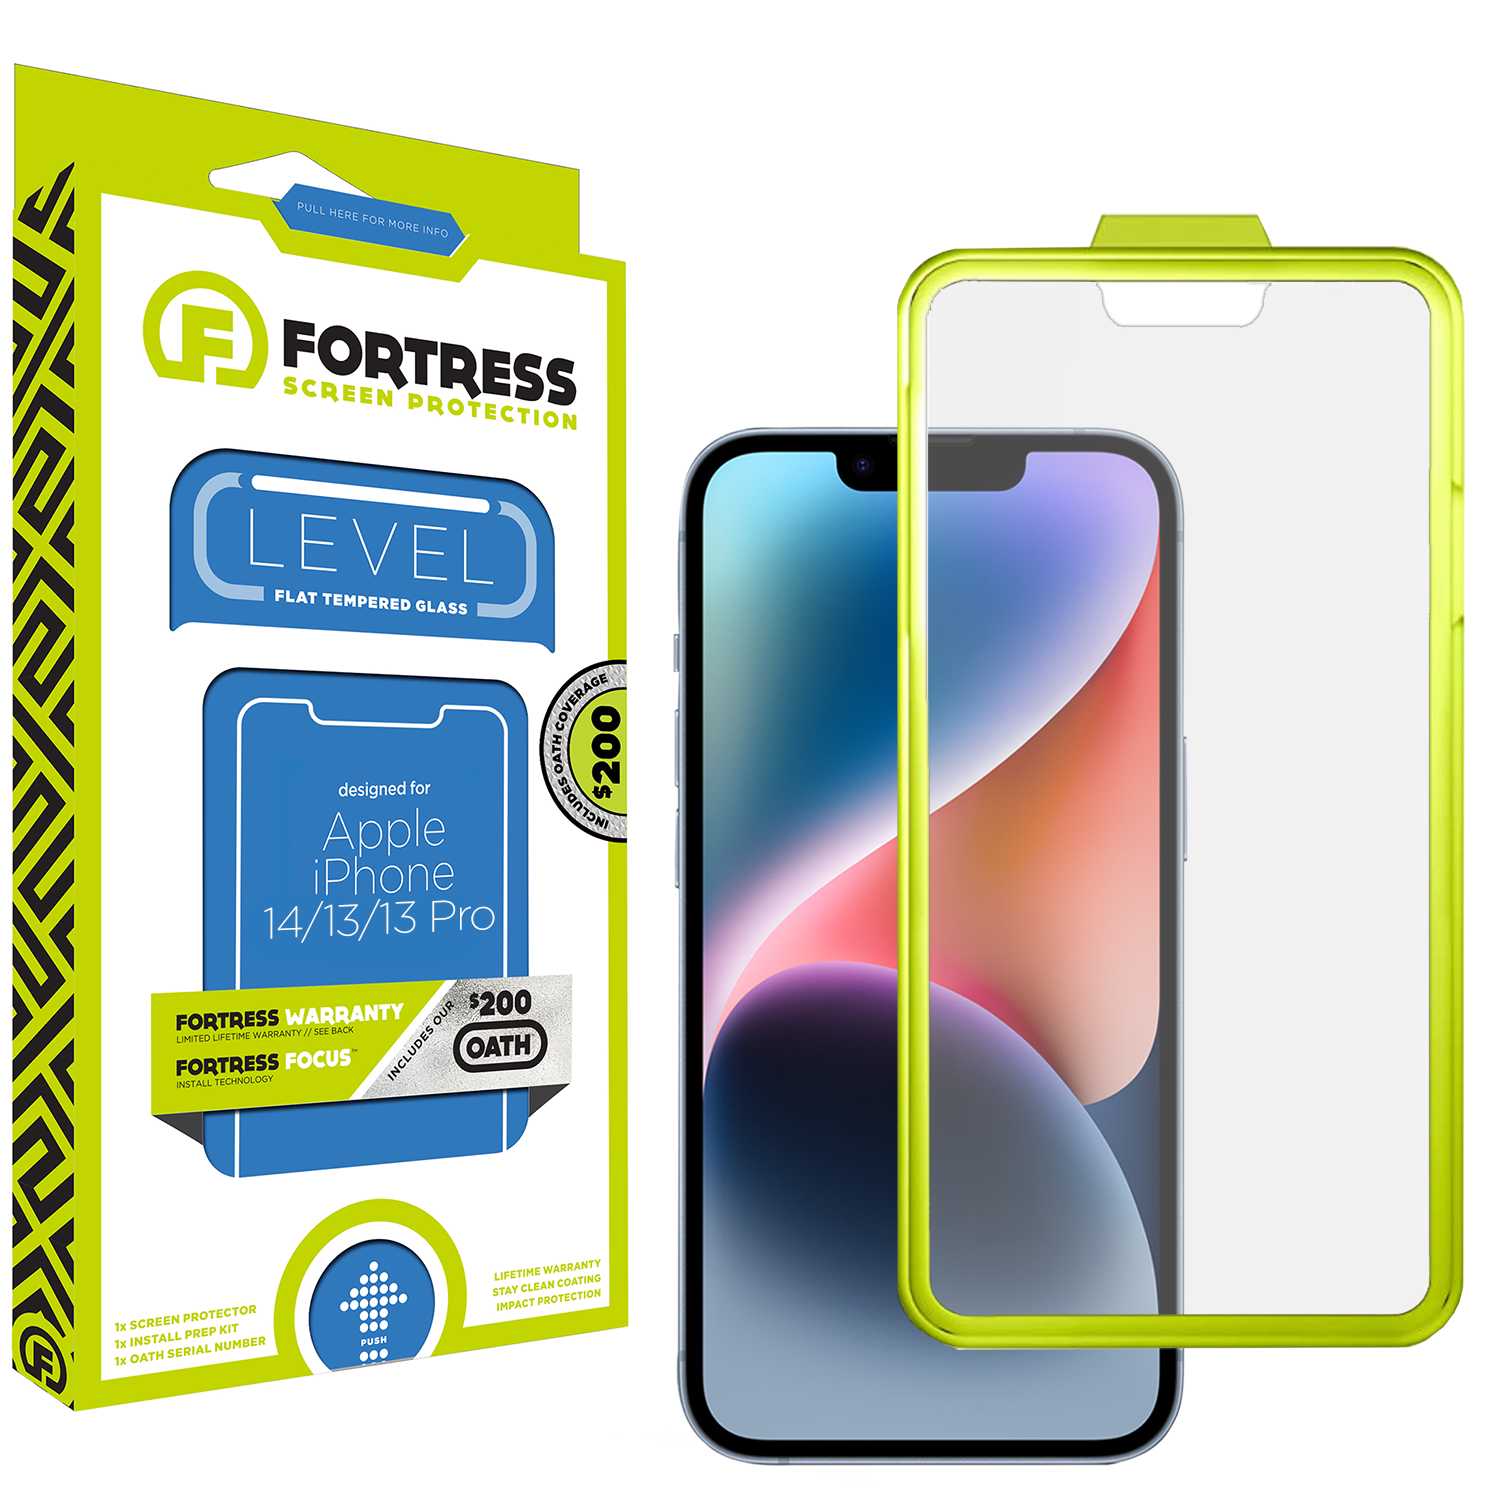 Fortress iPhone 13 Pro Screen Protector $200CoverageInstallTool Scooch Screen Protector